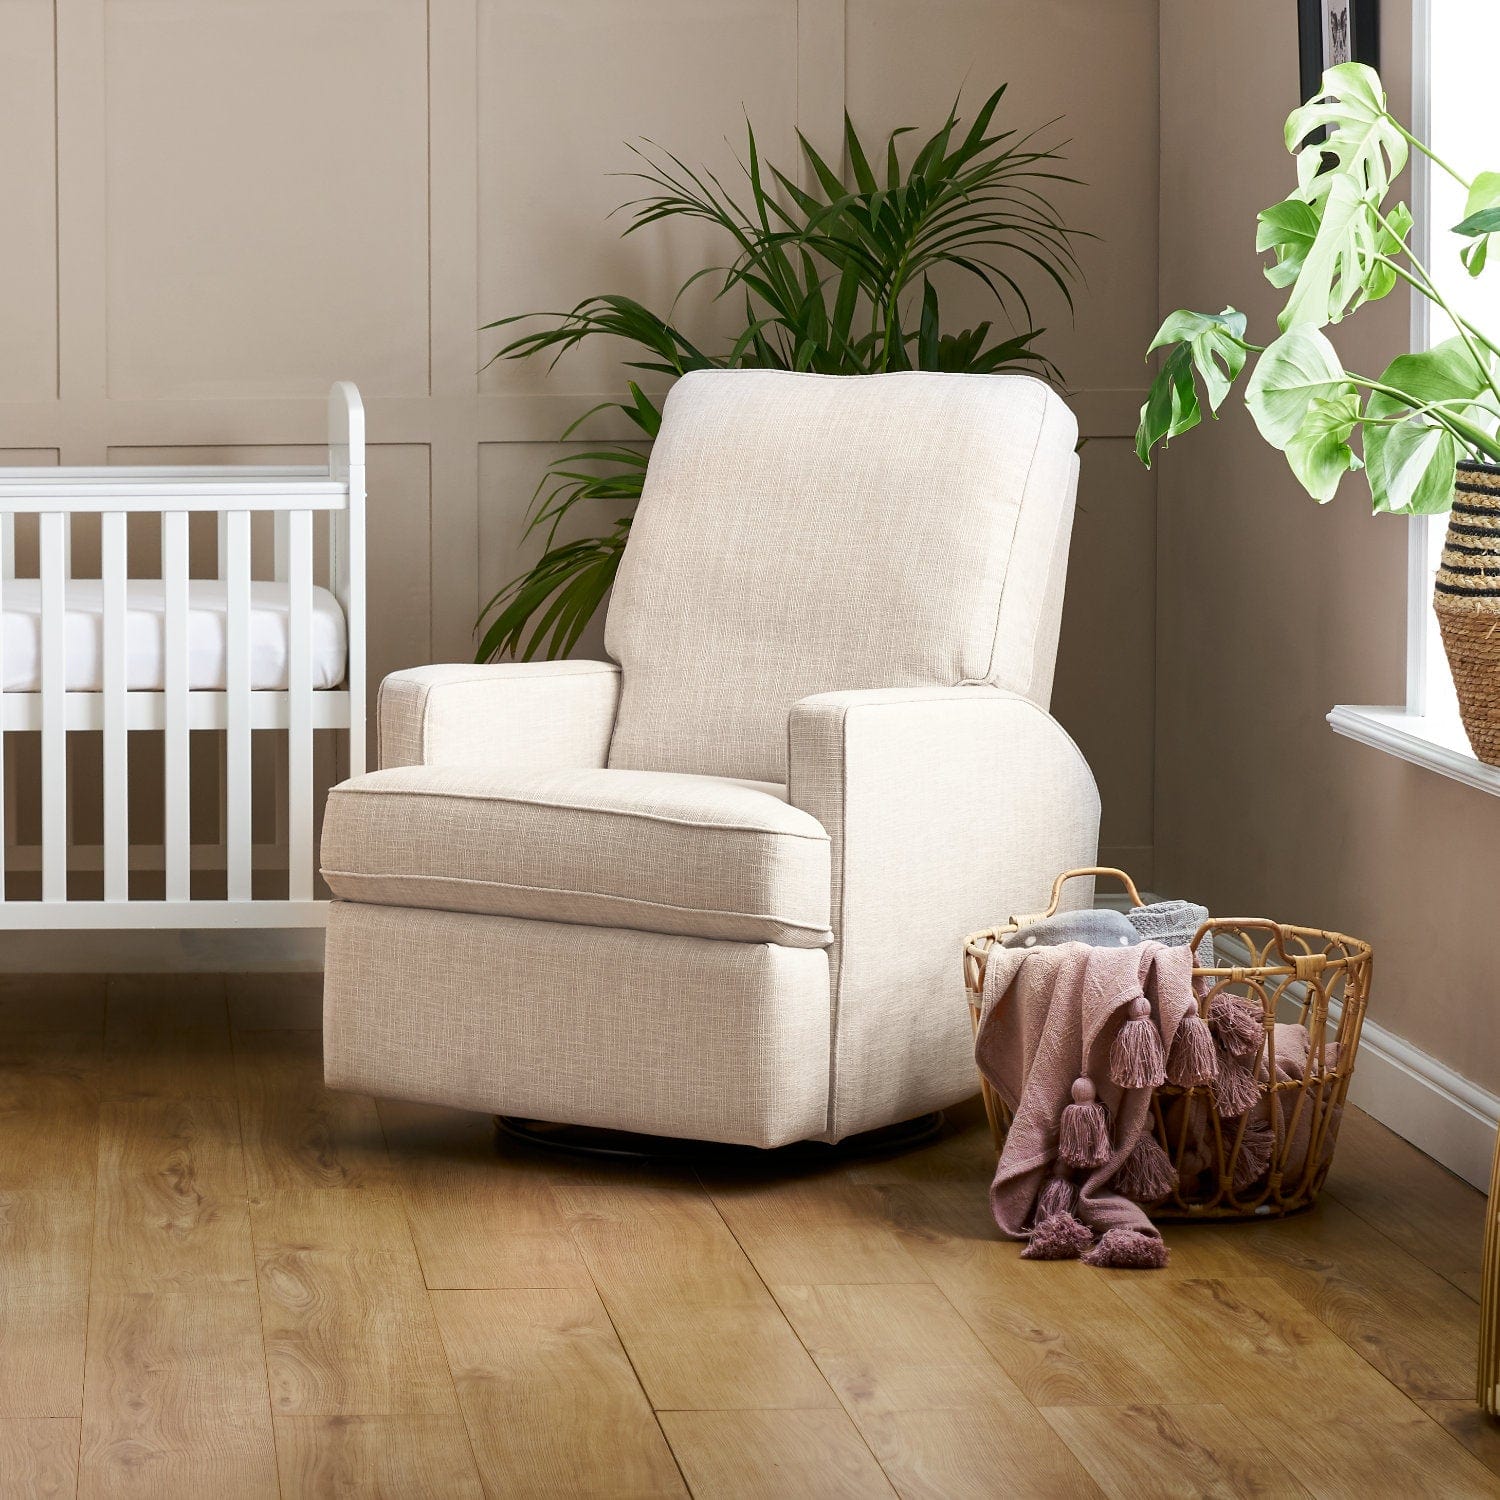 Obaby Nursery Furniture Oatmeal - Pre Order Obaby - Madison Swivel Glider Recliner Chair - Direct Delivery